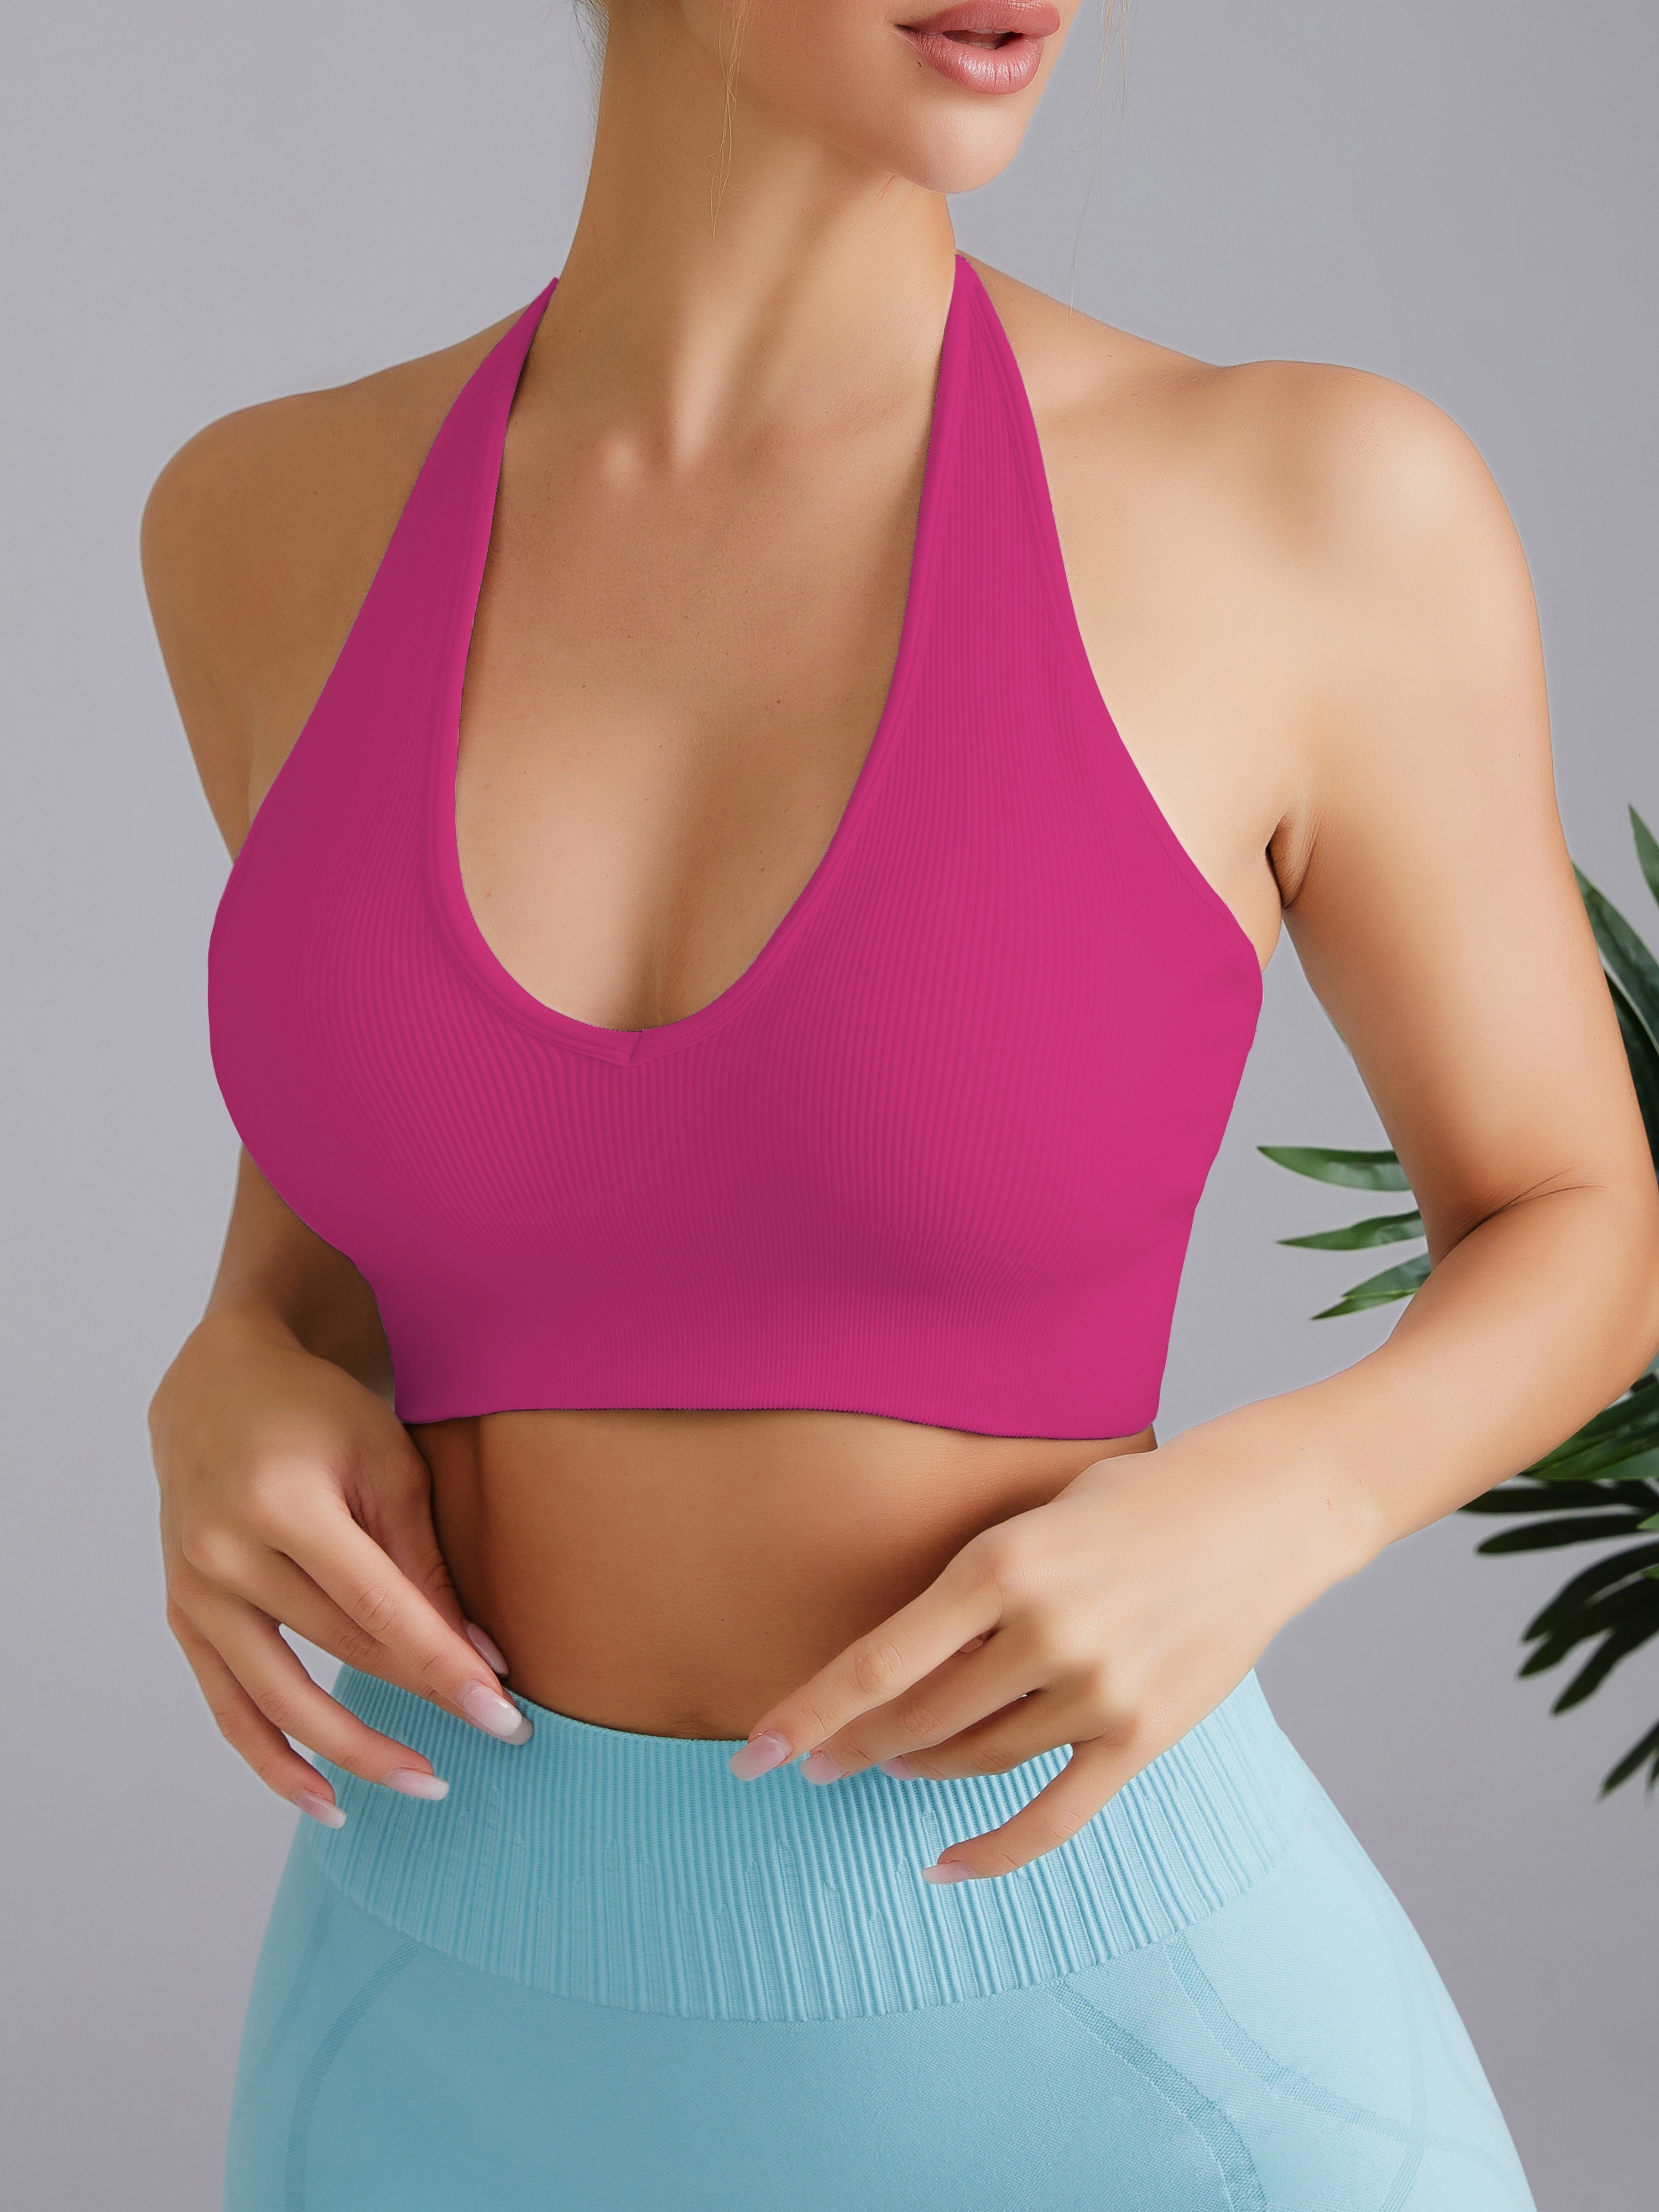 Sexy Laser Reflective Deep V Runderwear Bra For Women Perfect For Fitness,  Gym, Yoga And More! From Makeup99, $4.99